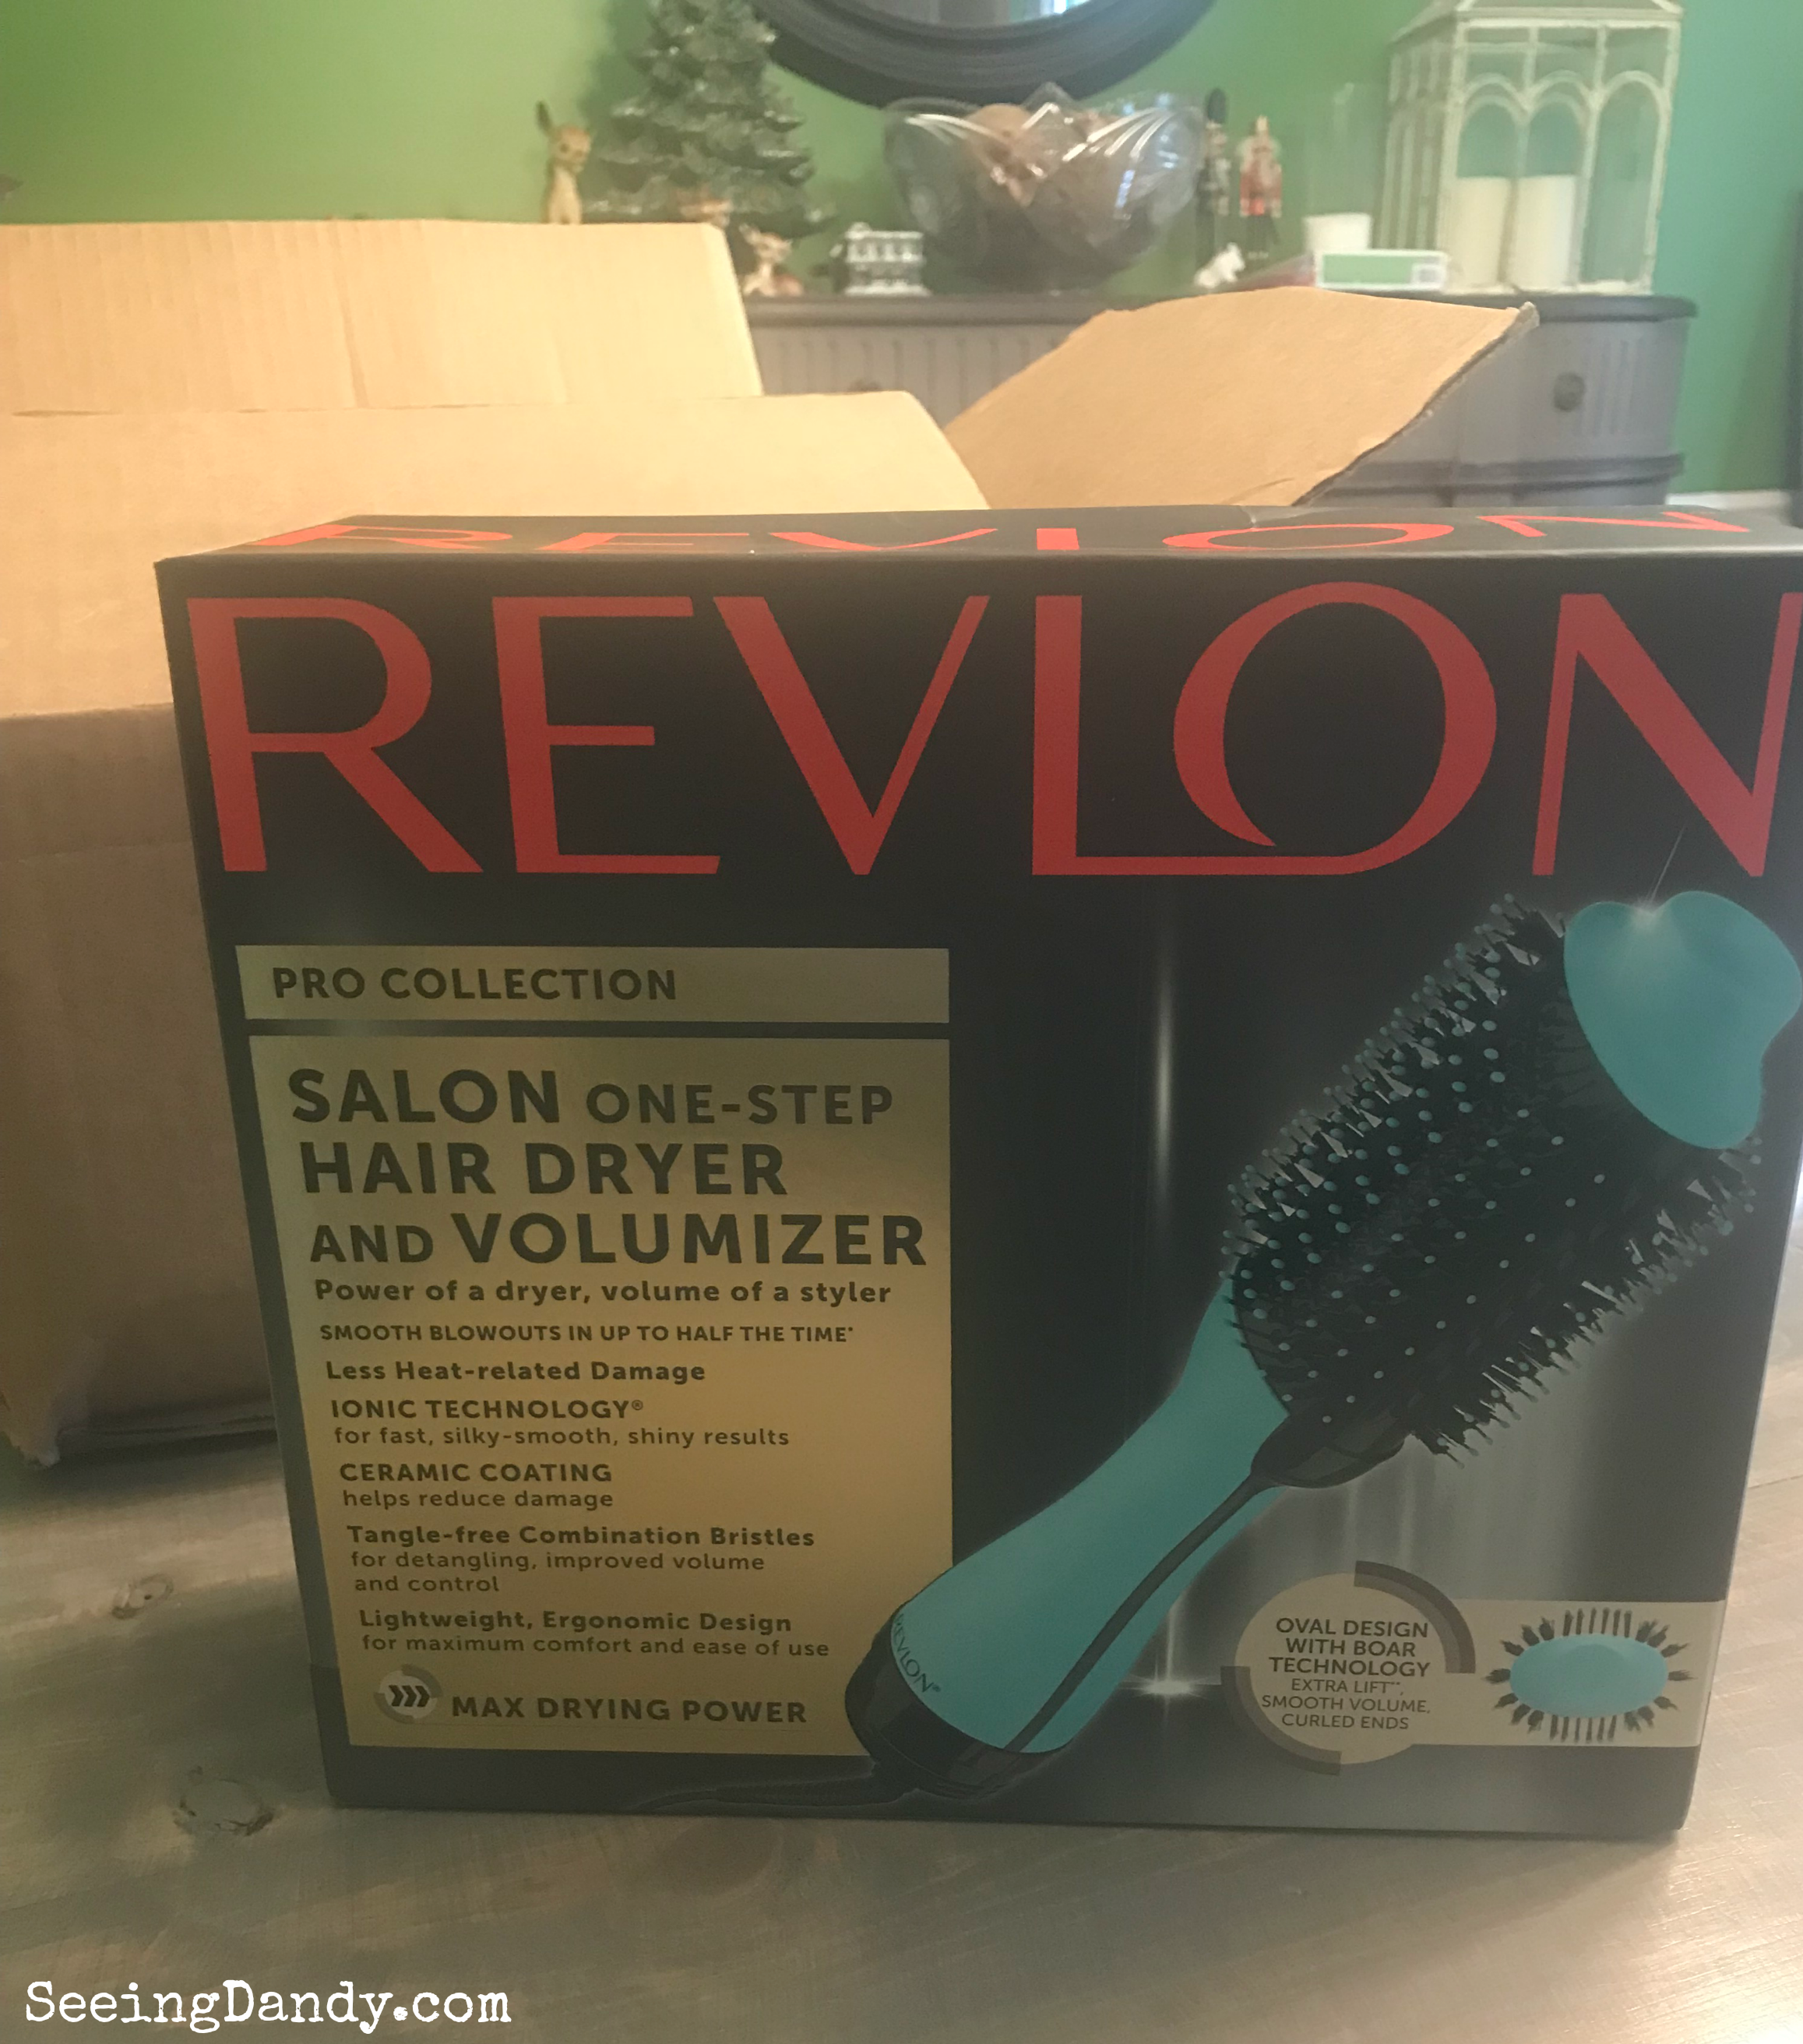 Revlon One Step Hair Dryer and Volumizer unboxing in modern farmhouse dining room. Box on farmhouse table with ceramic Christmas tree and other holiday decorations in the background.